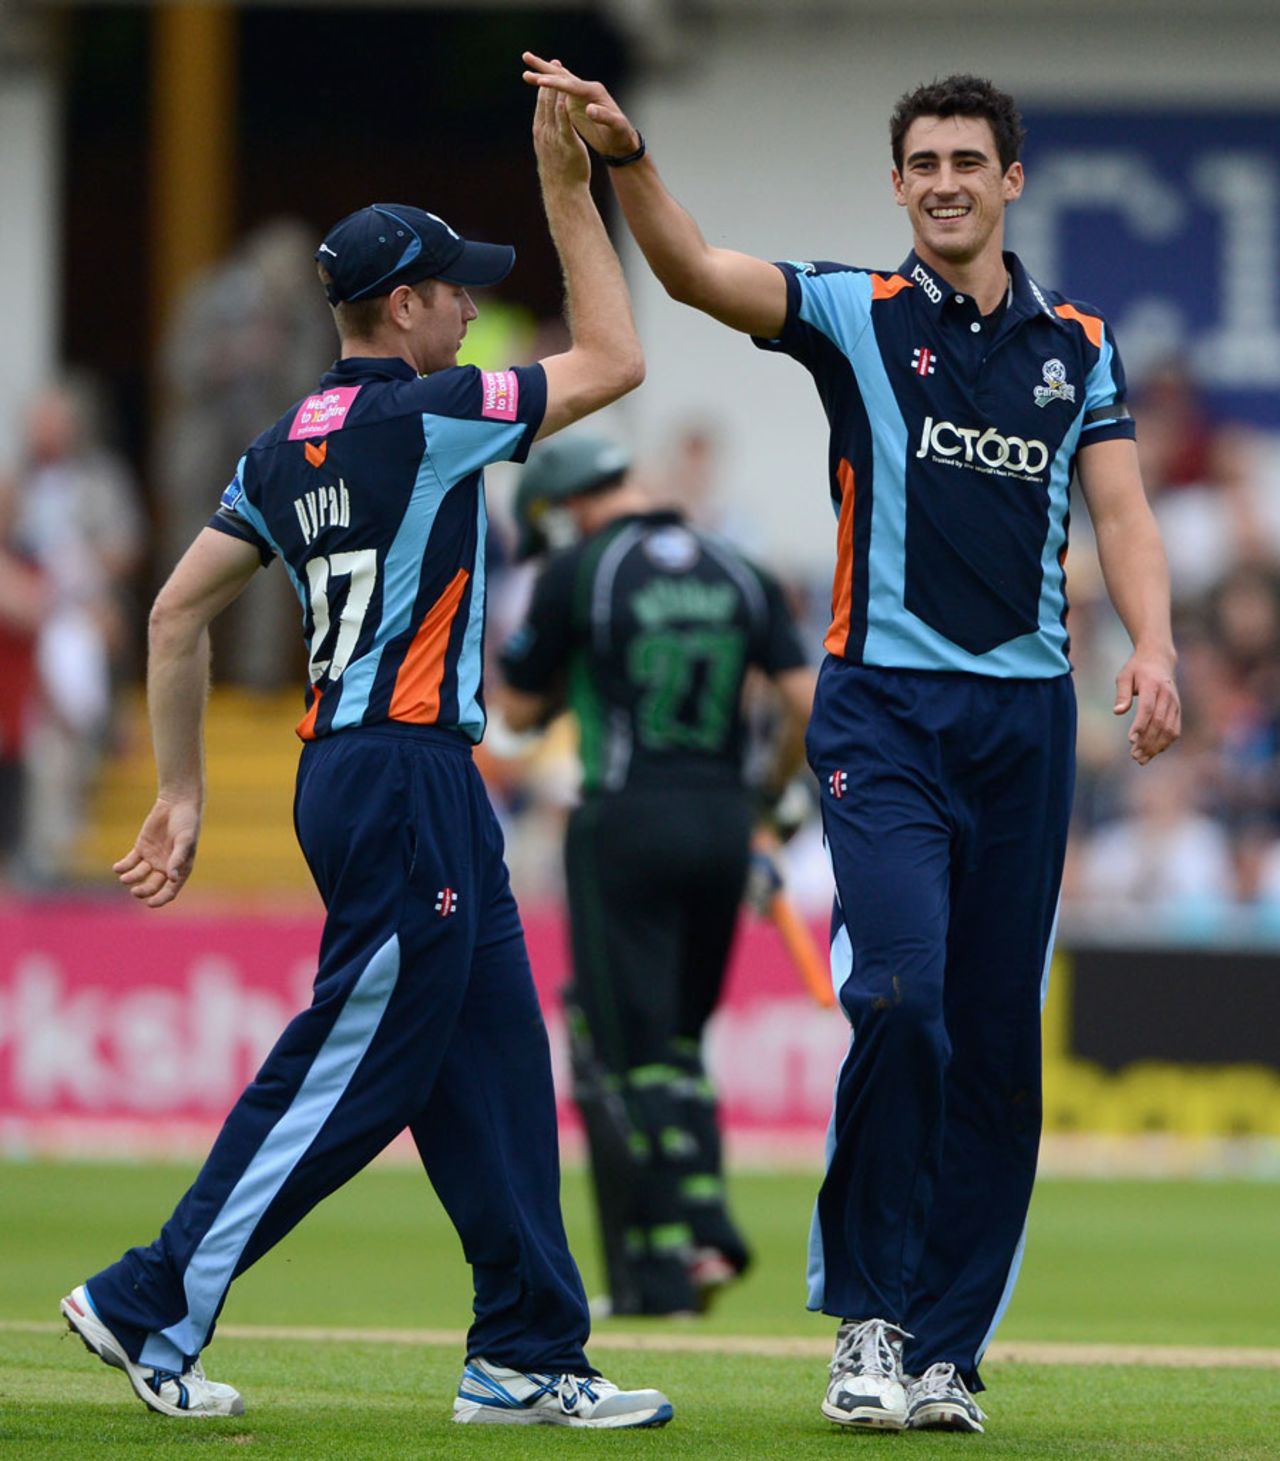 Mitchell Starc celebrates one of his three wickets, Yorkshire v Worcestershire, FLt20 quarter-final, Headingley, July 25, 2012